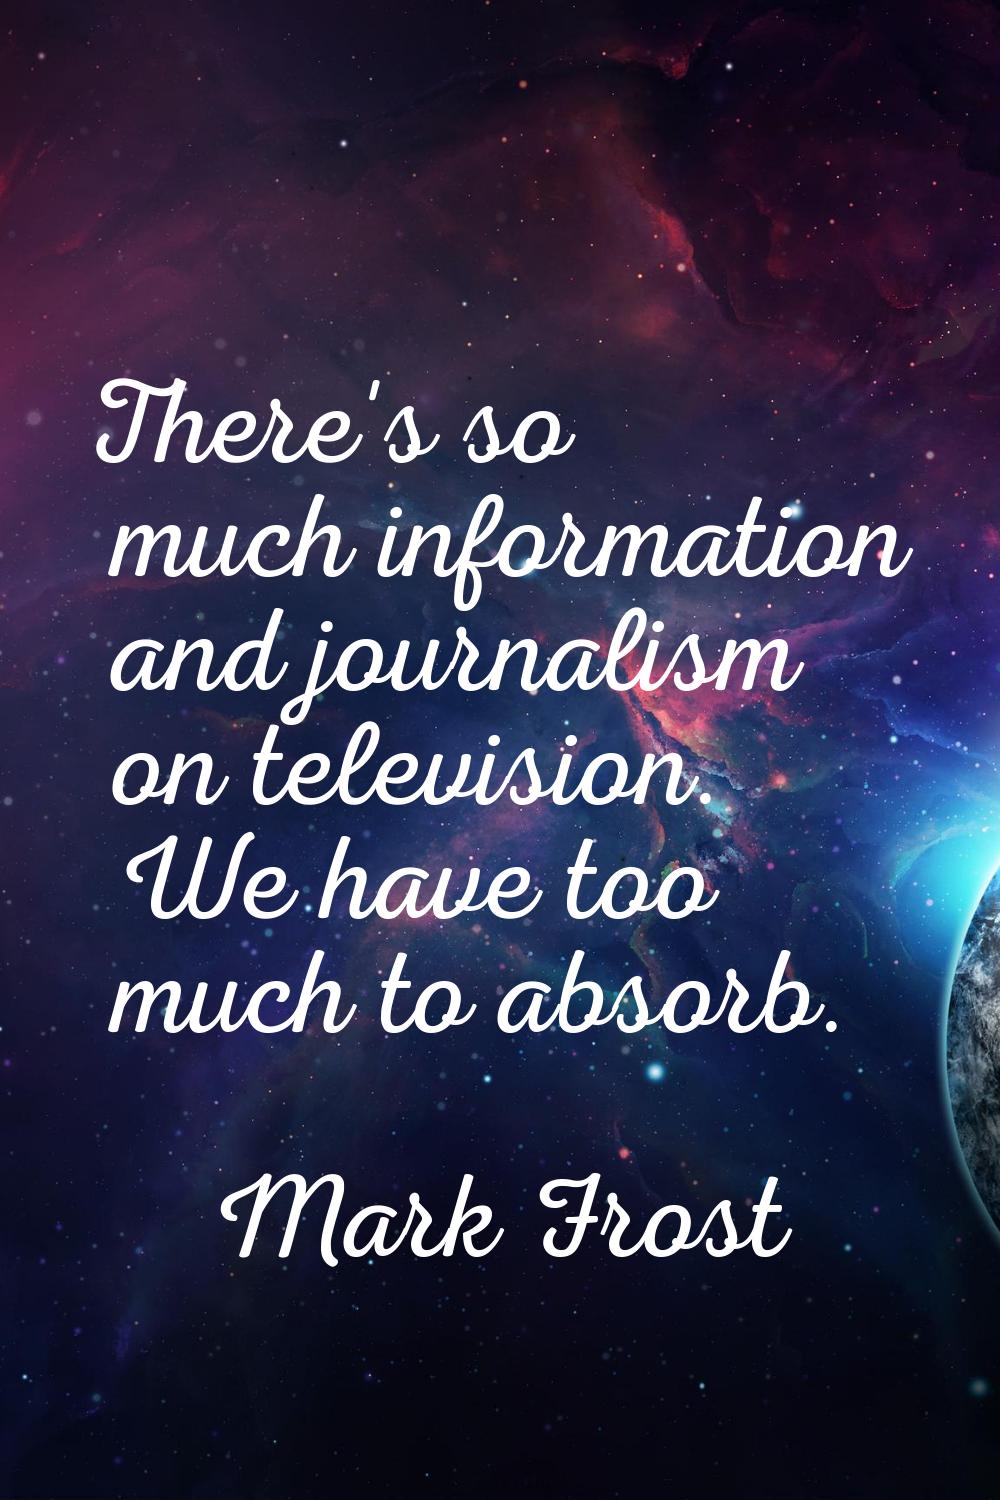 There's so much information and journalism on television. We have too much to absorb.